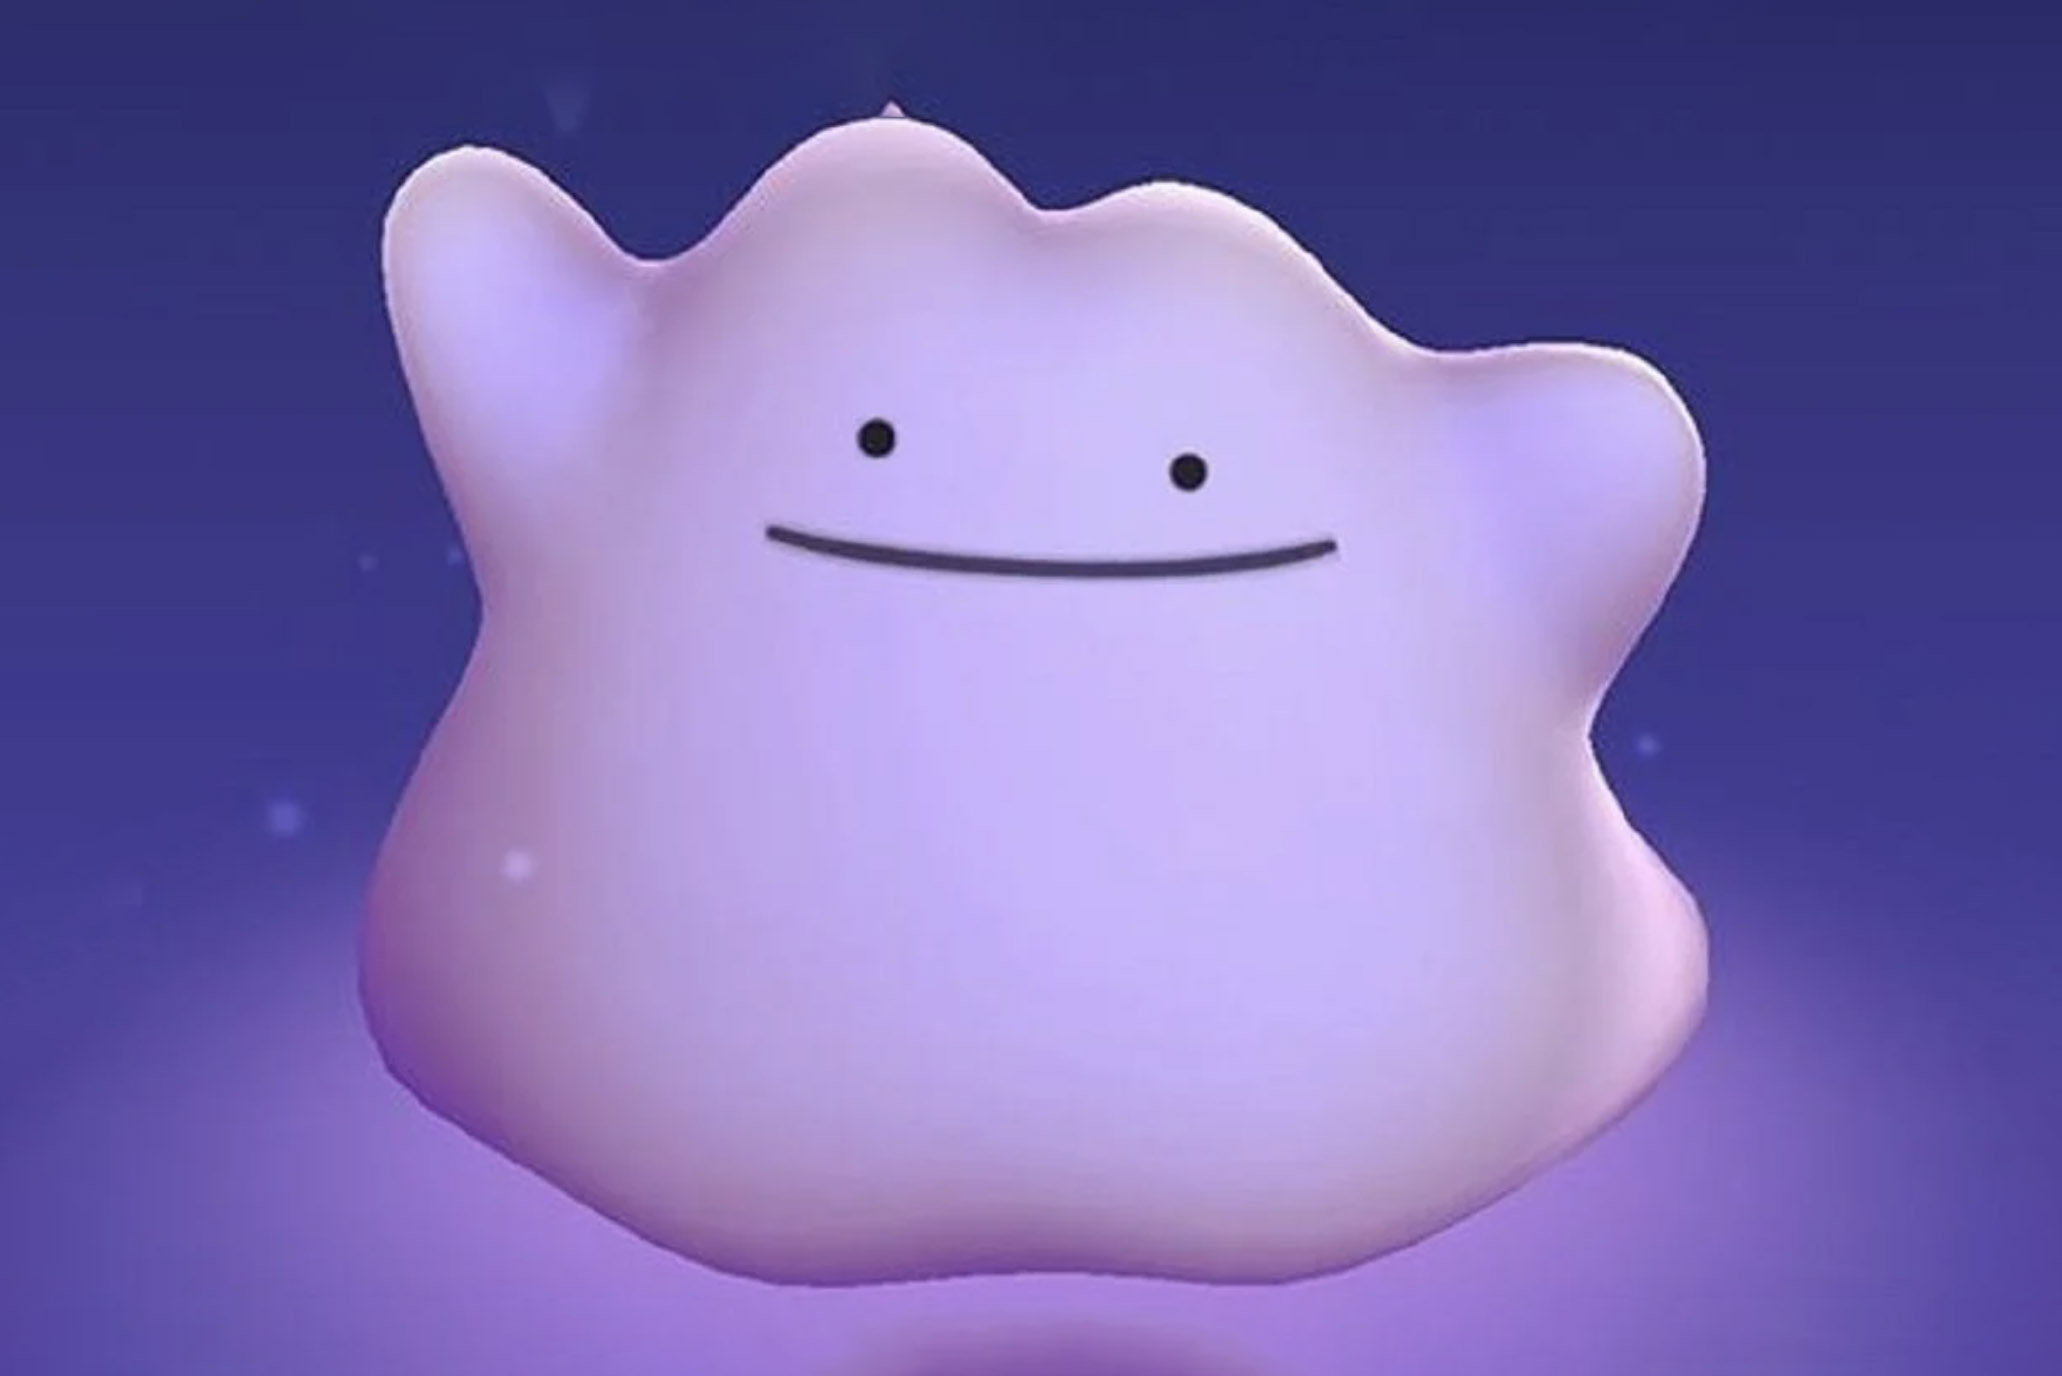 Important Tips on How to Catch Ditto in Pokemon GO!